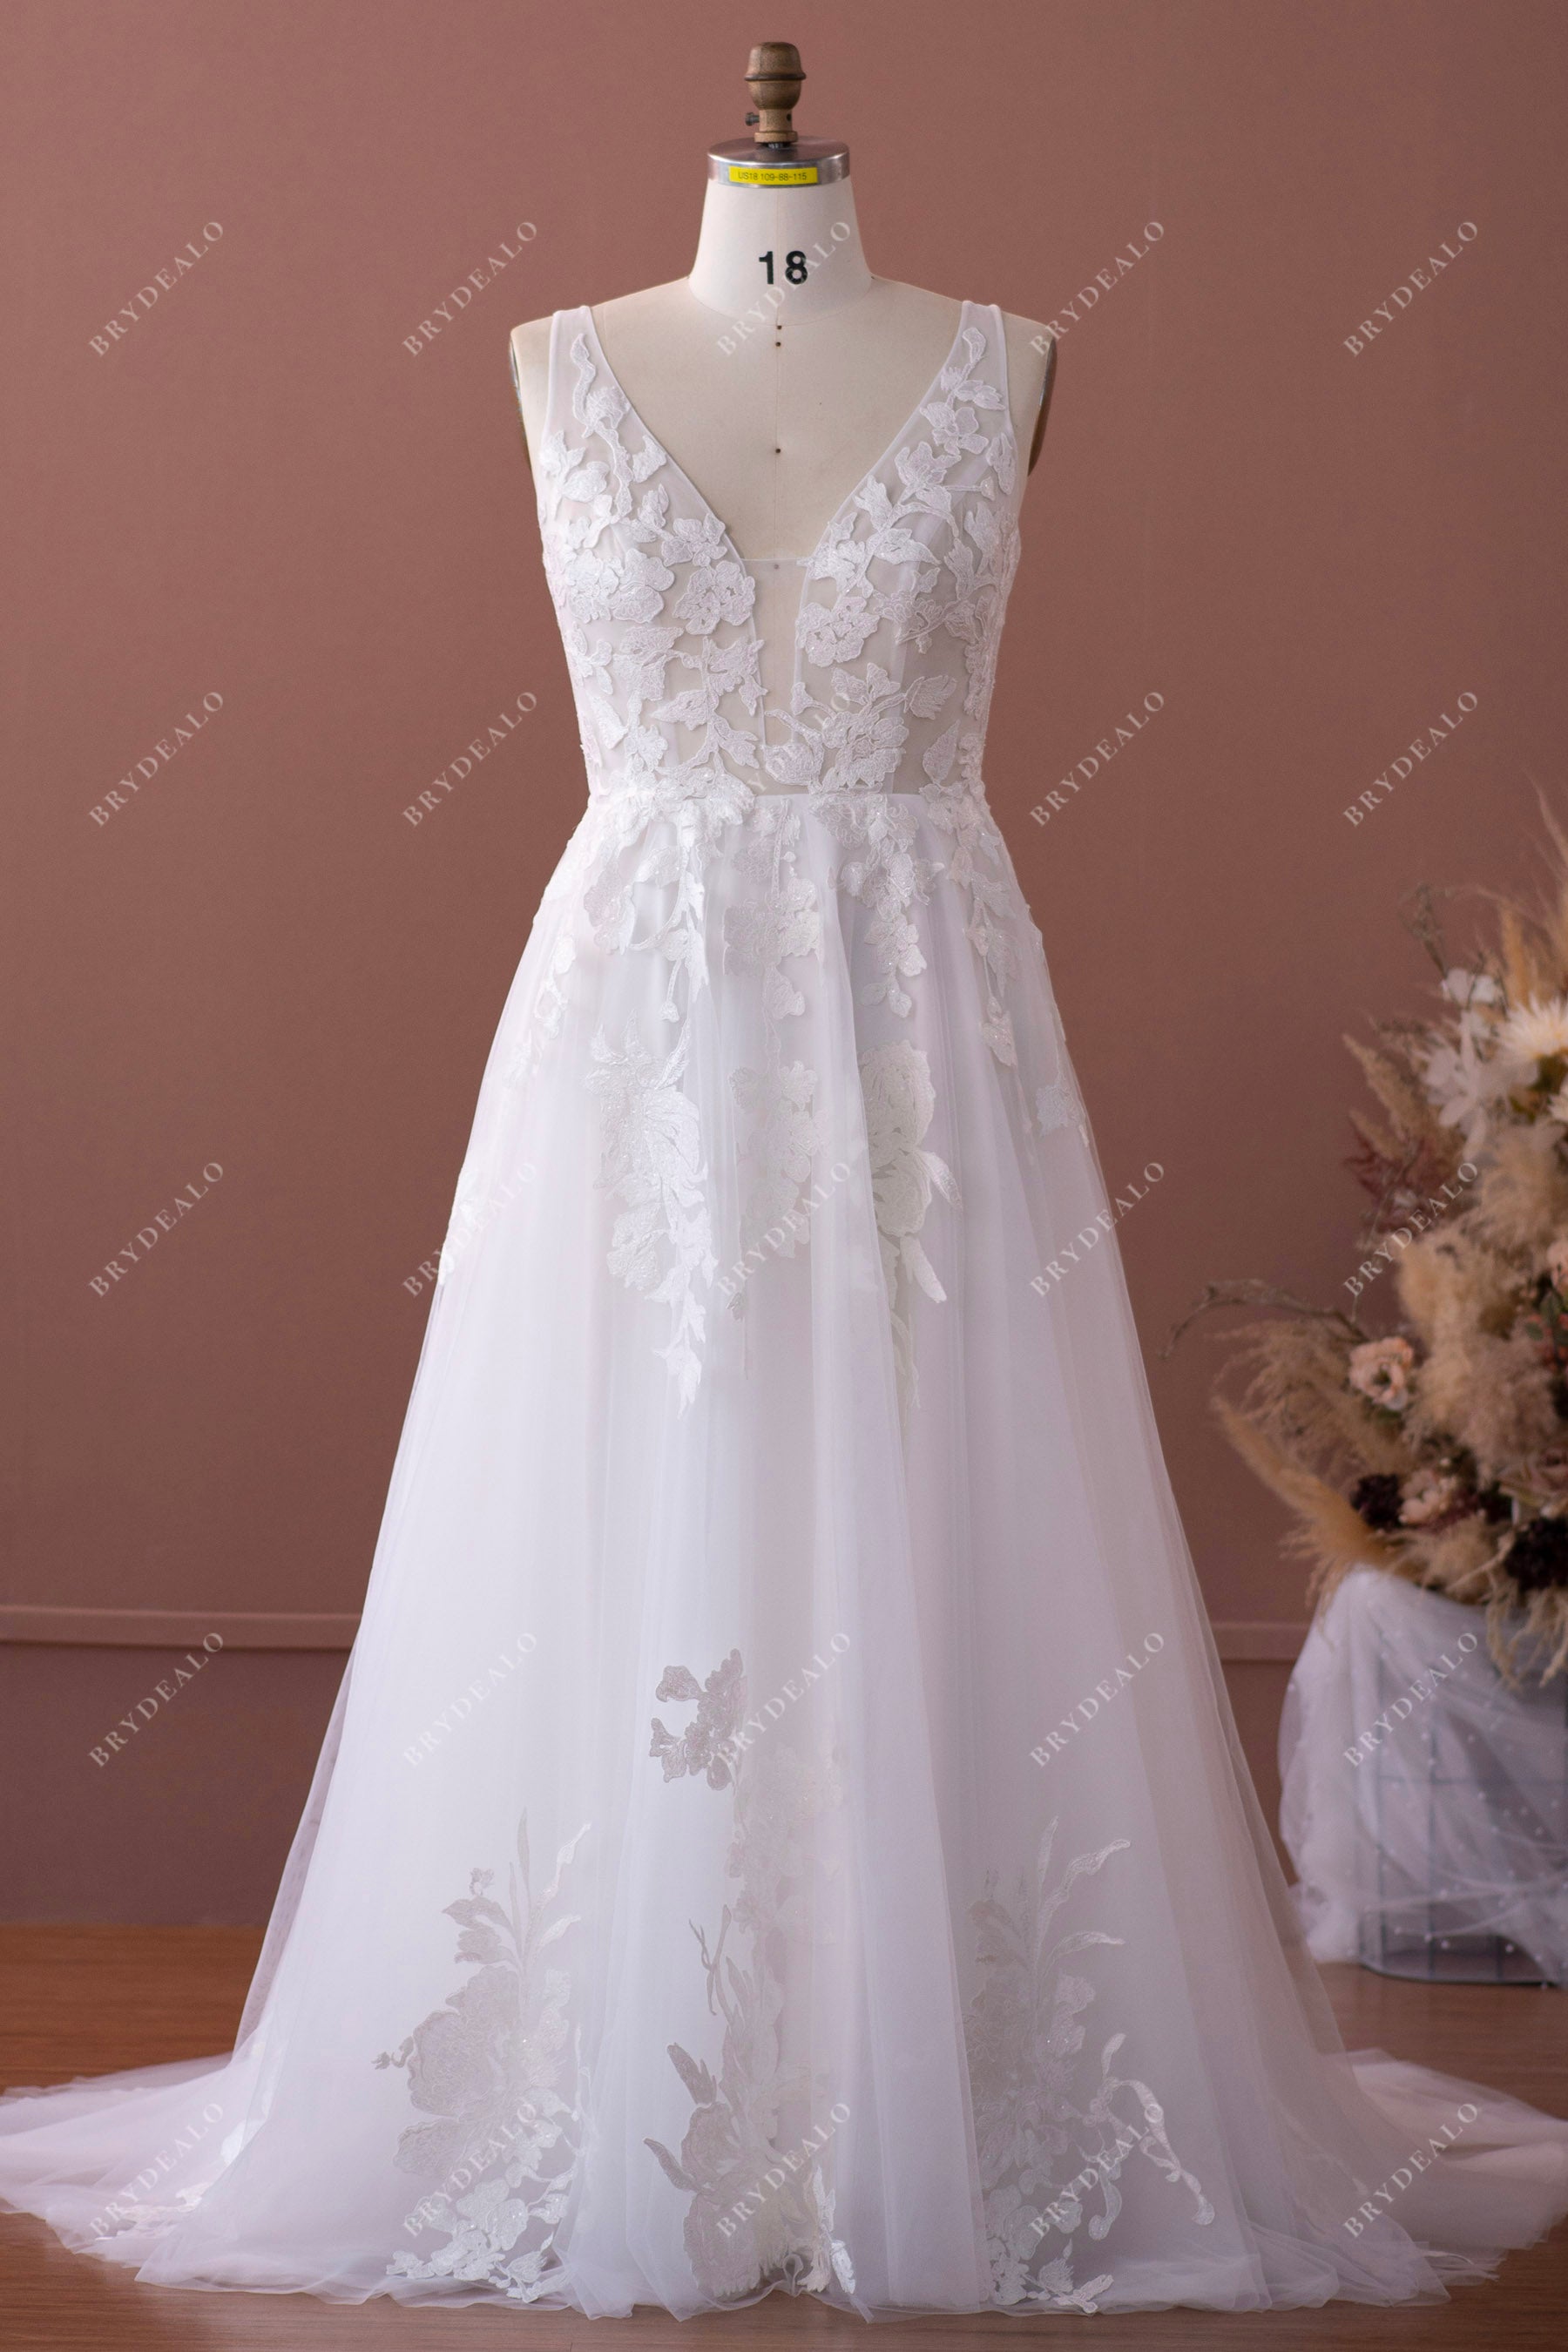 https://cdn.shopify.com/s/files/1/0558/7599/3647/products/straps-plunging-Aline-lace-wedding-dress.jpg?v=1656854848&width=1800